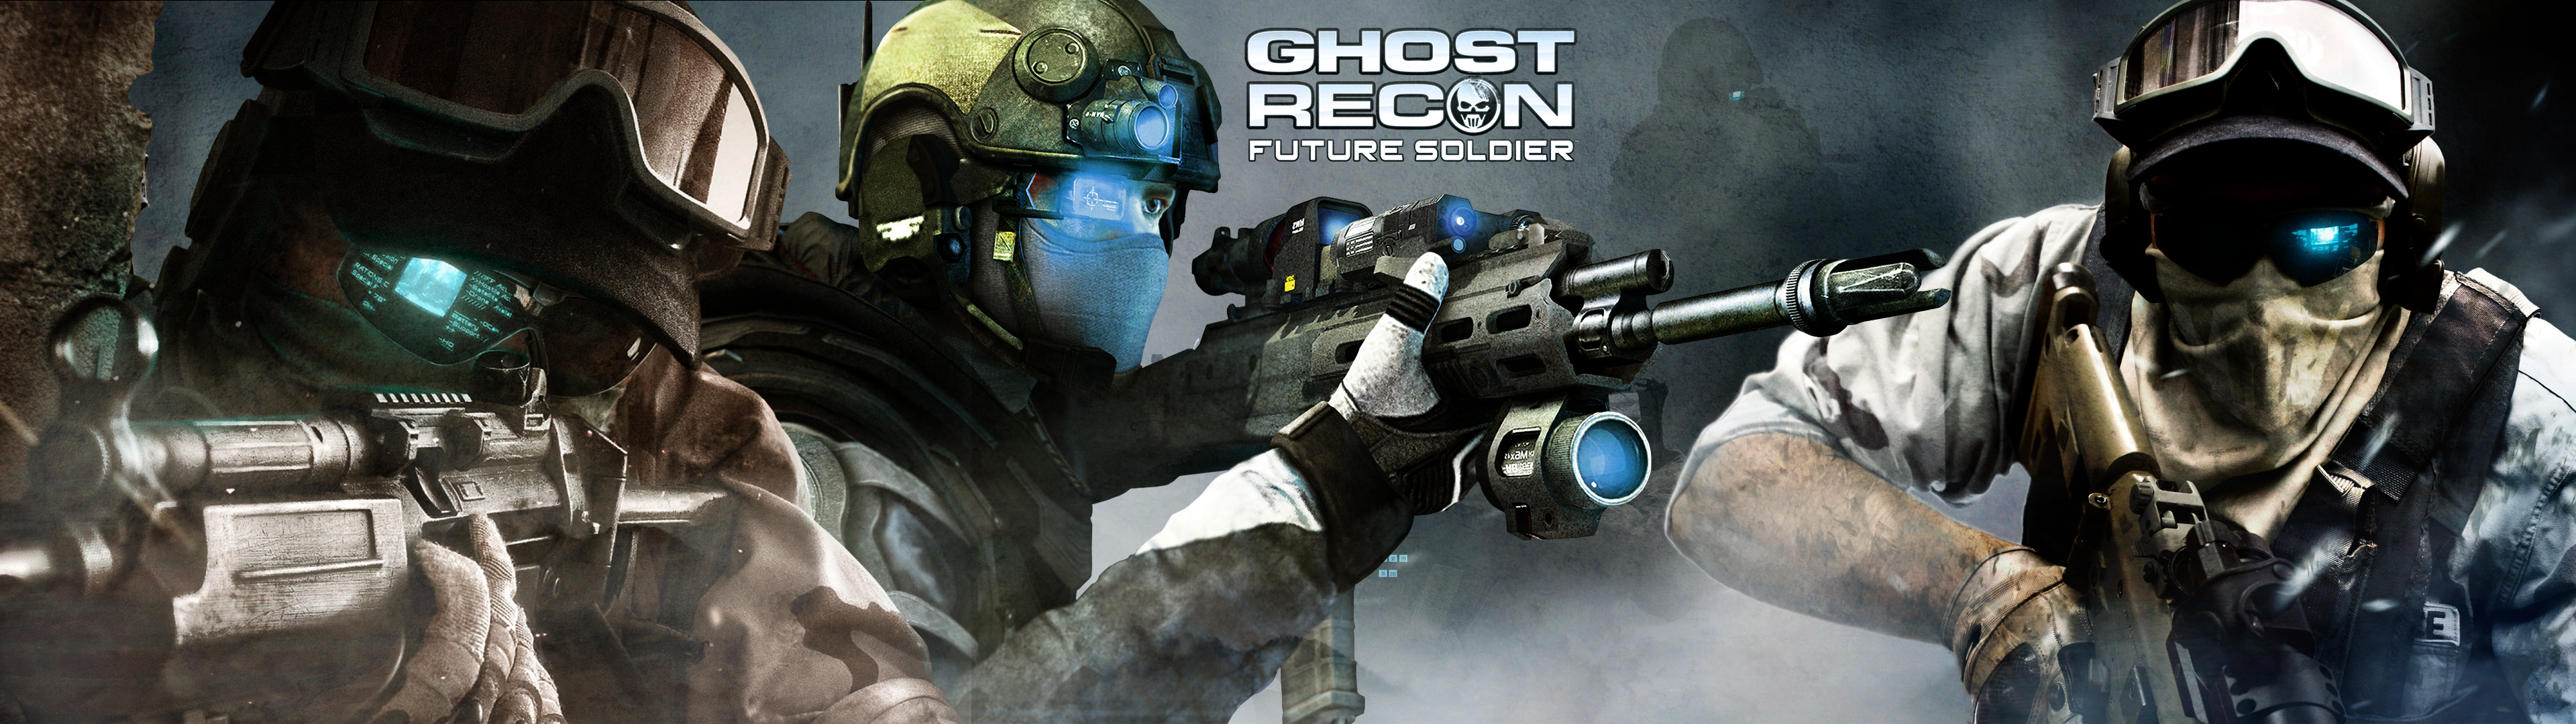 General 3840x1080 special forces tactical military video games smoke assault rifle dual monitors multiple display Tom Clancy's Ghost Recon Tom Clancy's Ghost Recon: Future Soldier